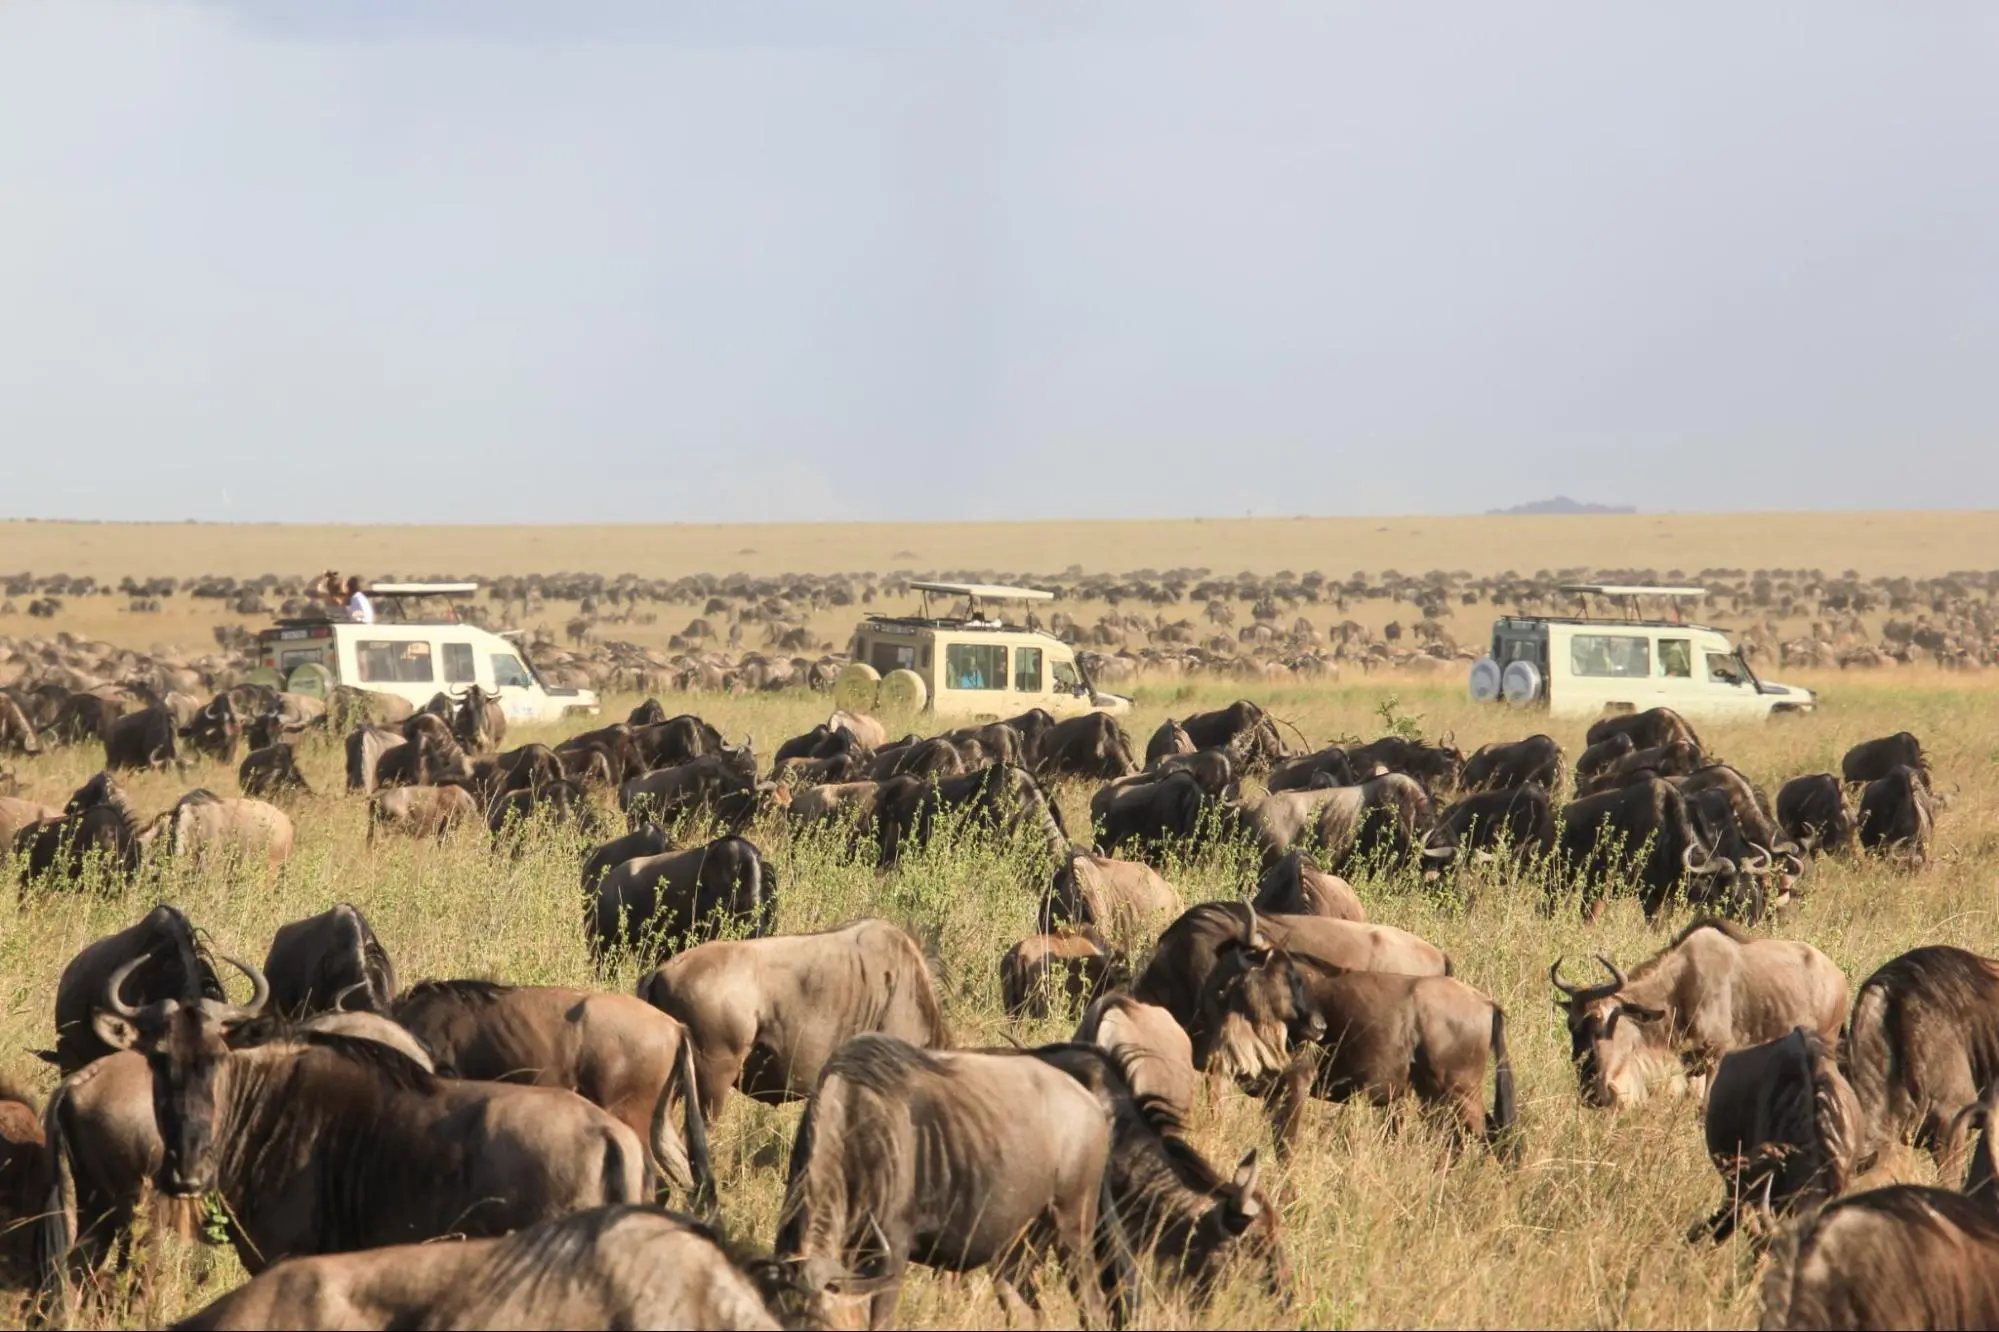 A mesmerizing view of a wildebeest herd, epitomizing the vastness of Serengeti National Park's wilderness.